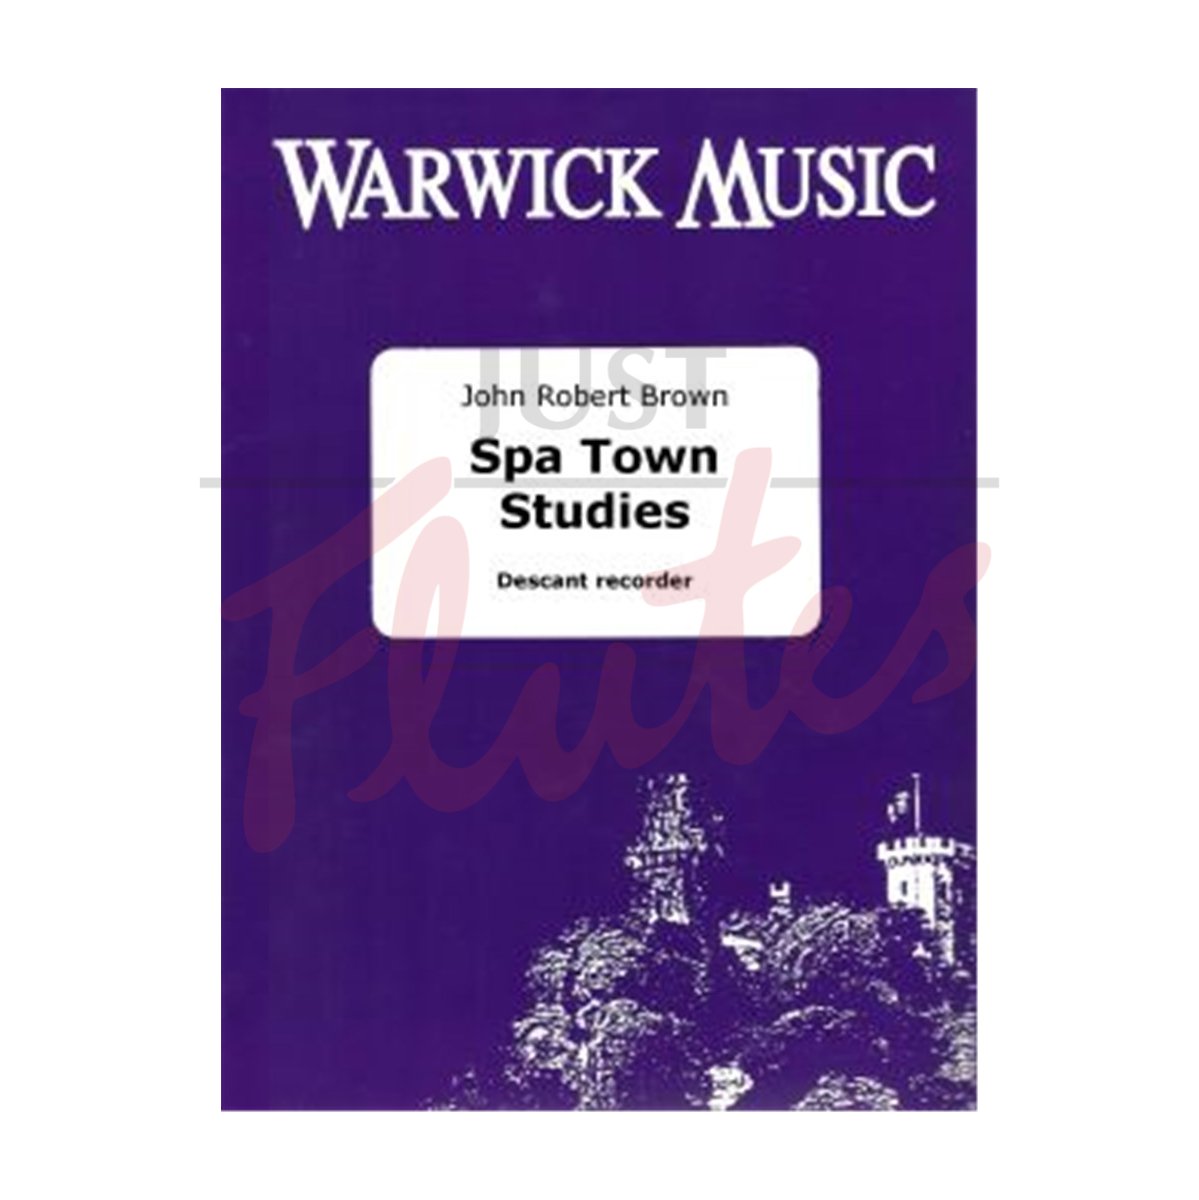 Spa Town Studies for Descant Recorder